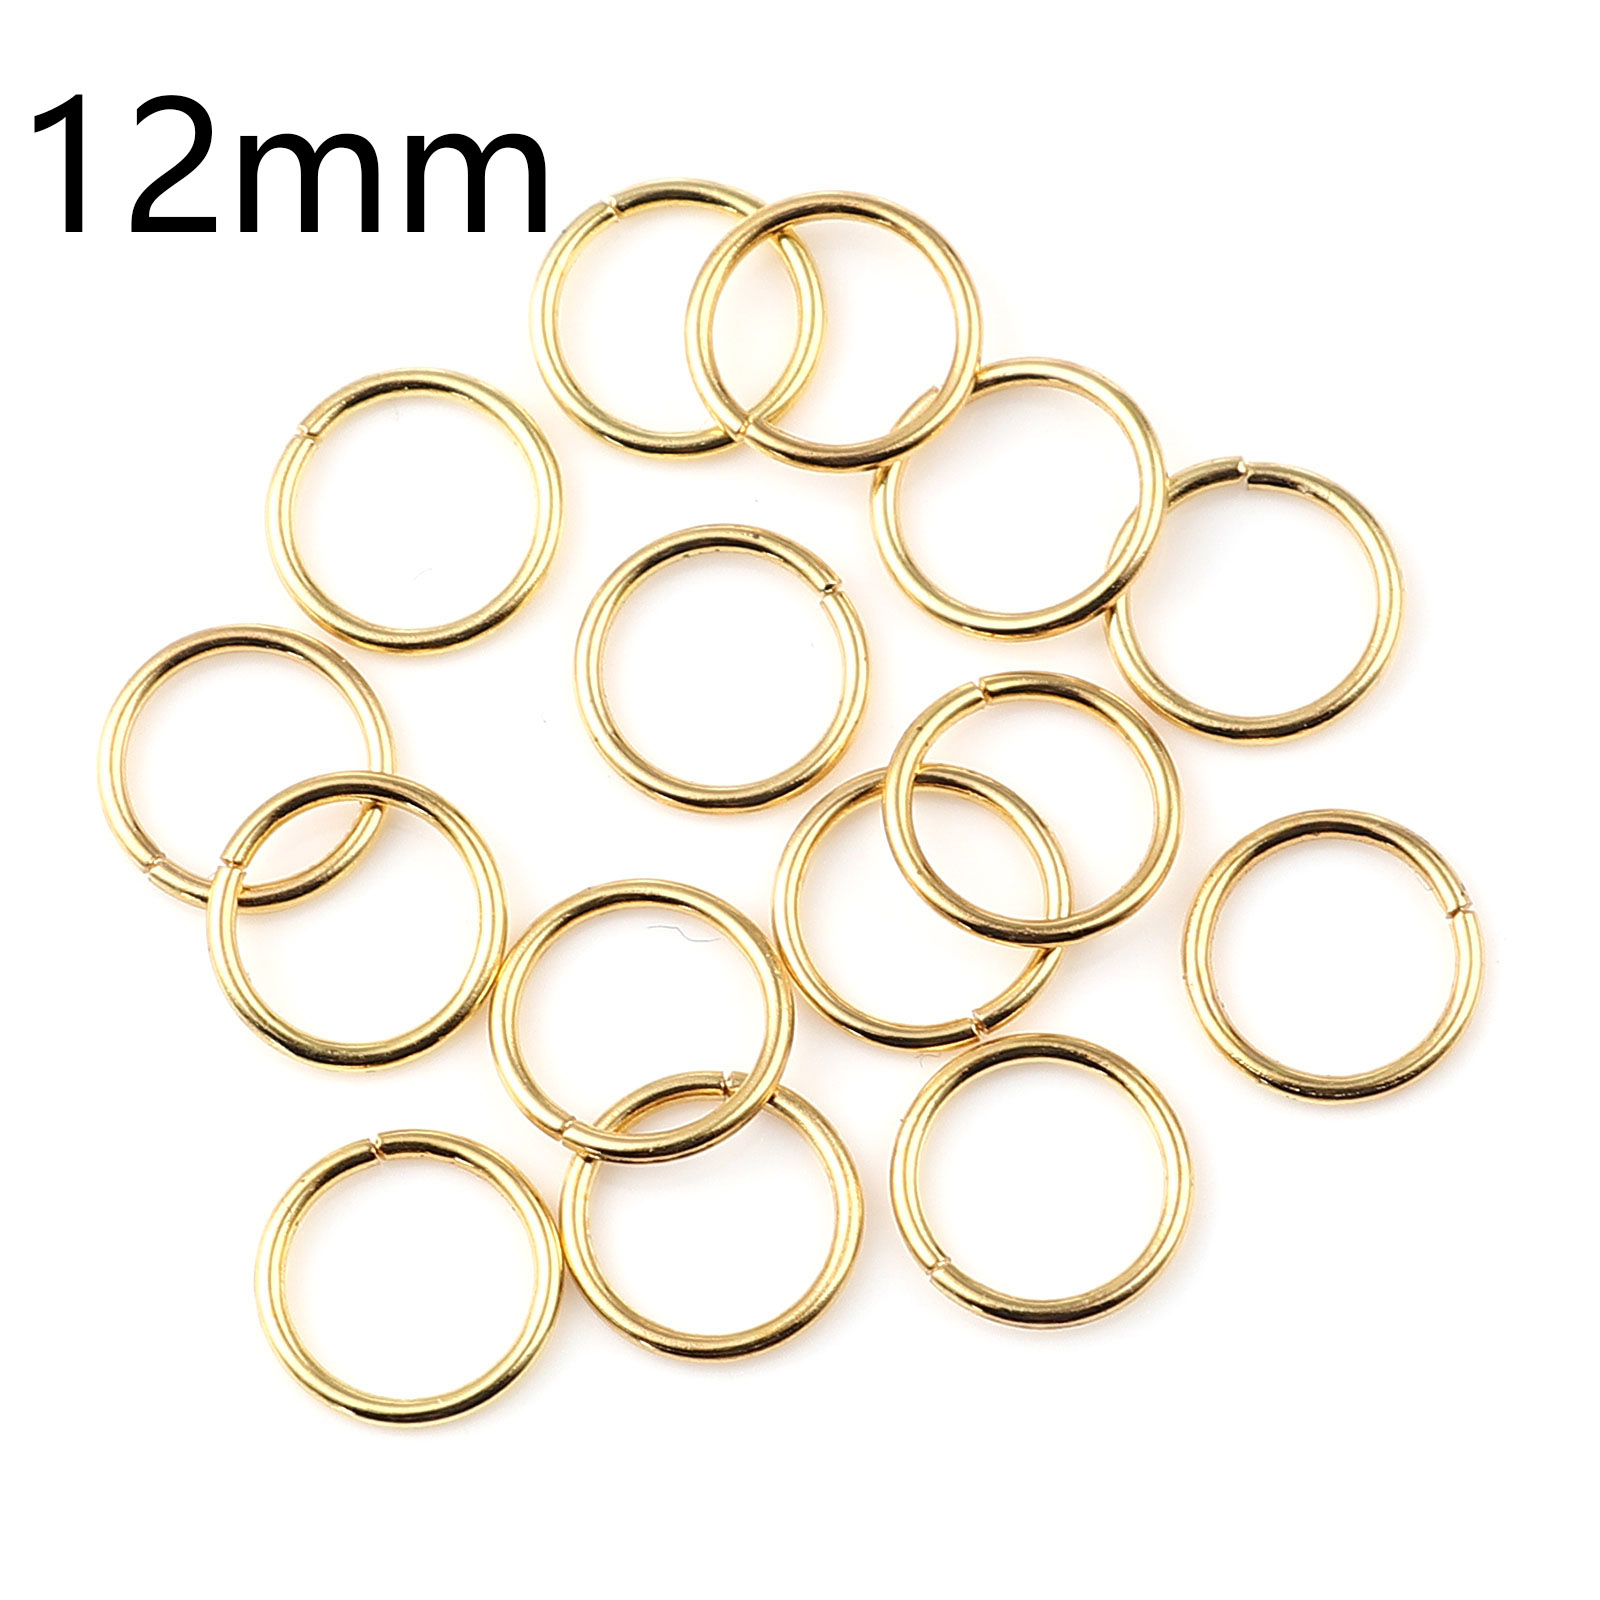 Picture of 1.2mm Iron Based Alloy Open Jump Rings Findings Circle Ring Gold Plated 12mm Dia, 200 PCs